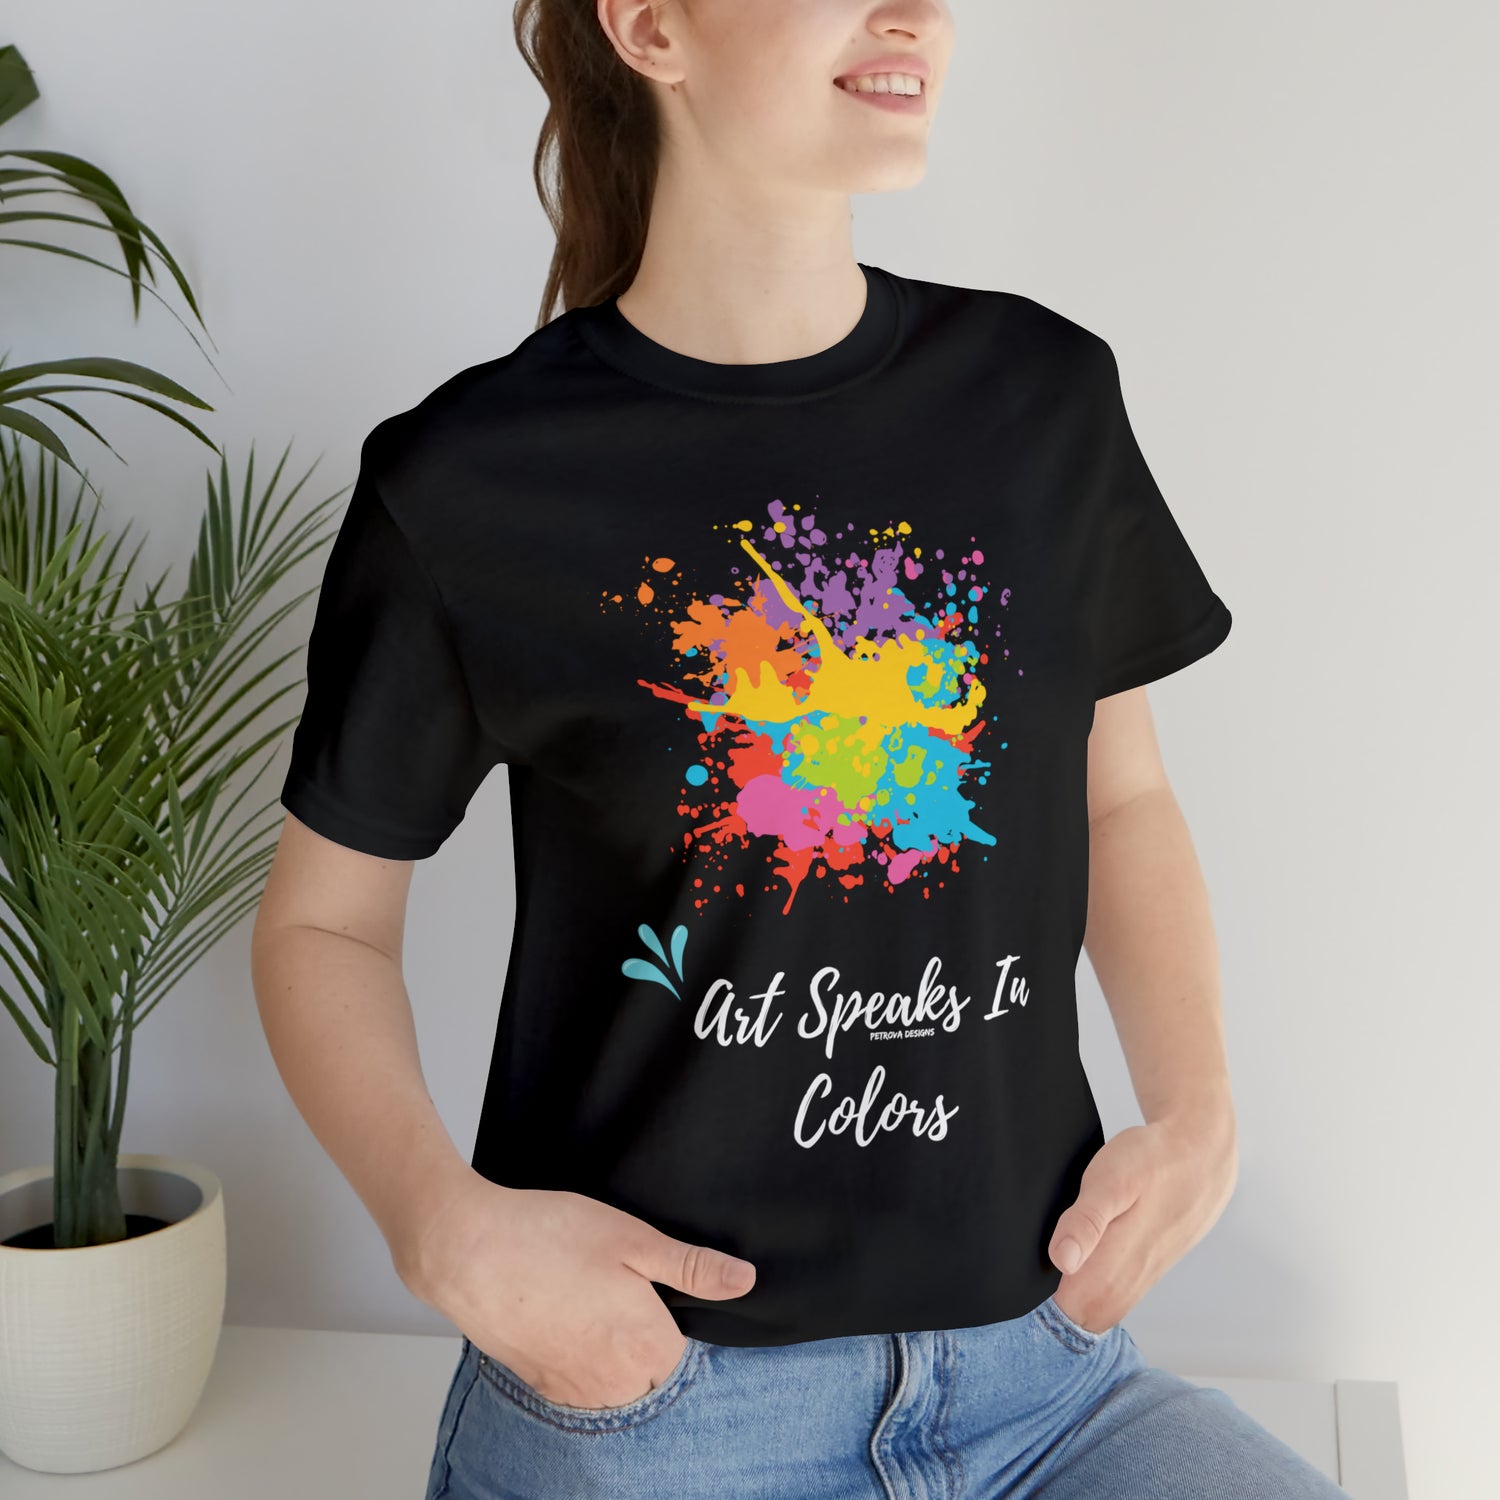 Express Your Passions with Our Hobby Enthusiast T-Shirts Collection | Petrova Designs